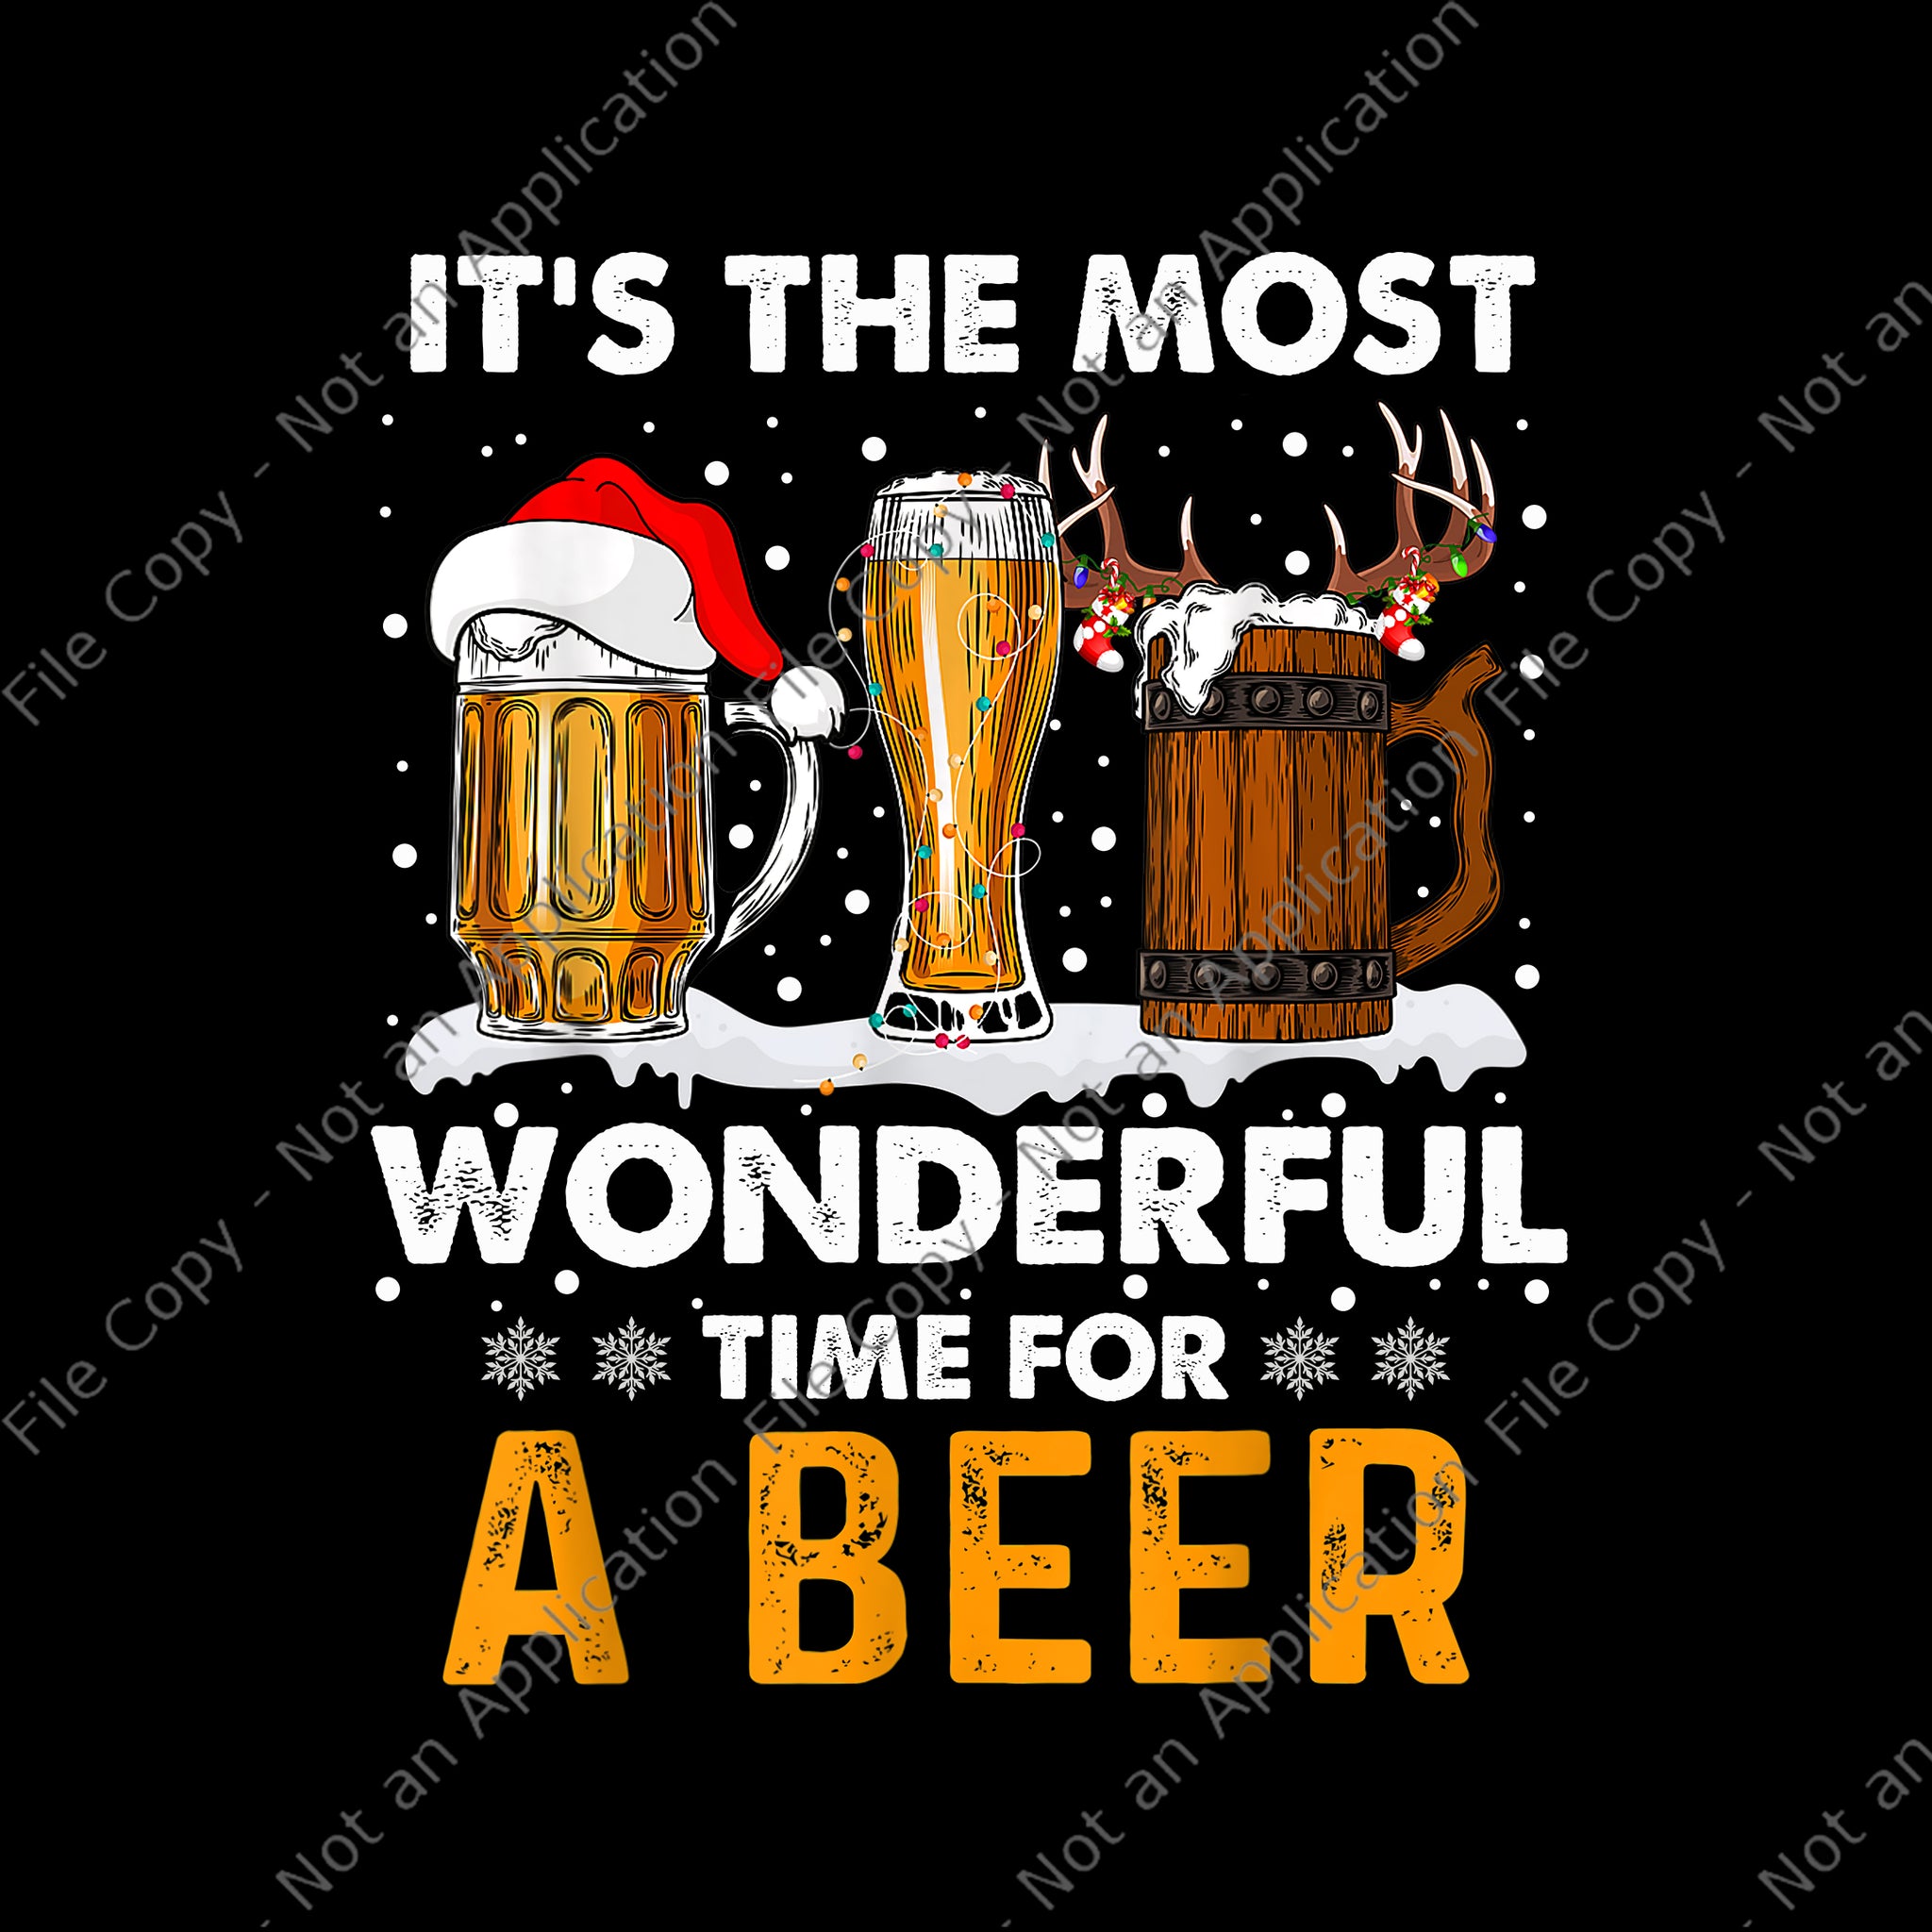 It's The Most Wonderful Time For A Beer Christmas Png, Drink Xmas Png, Beer Christmas Png, Christmas Png, Santa Png